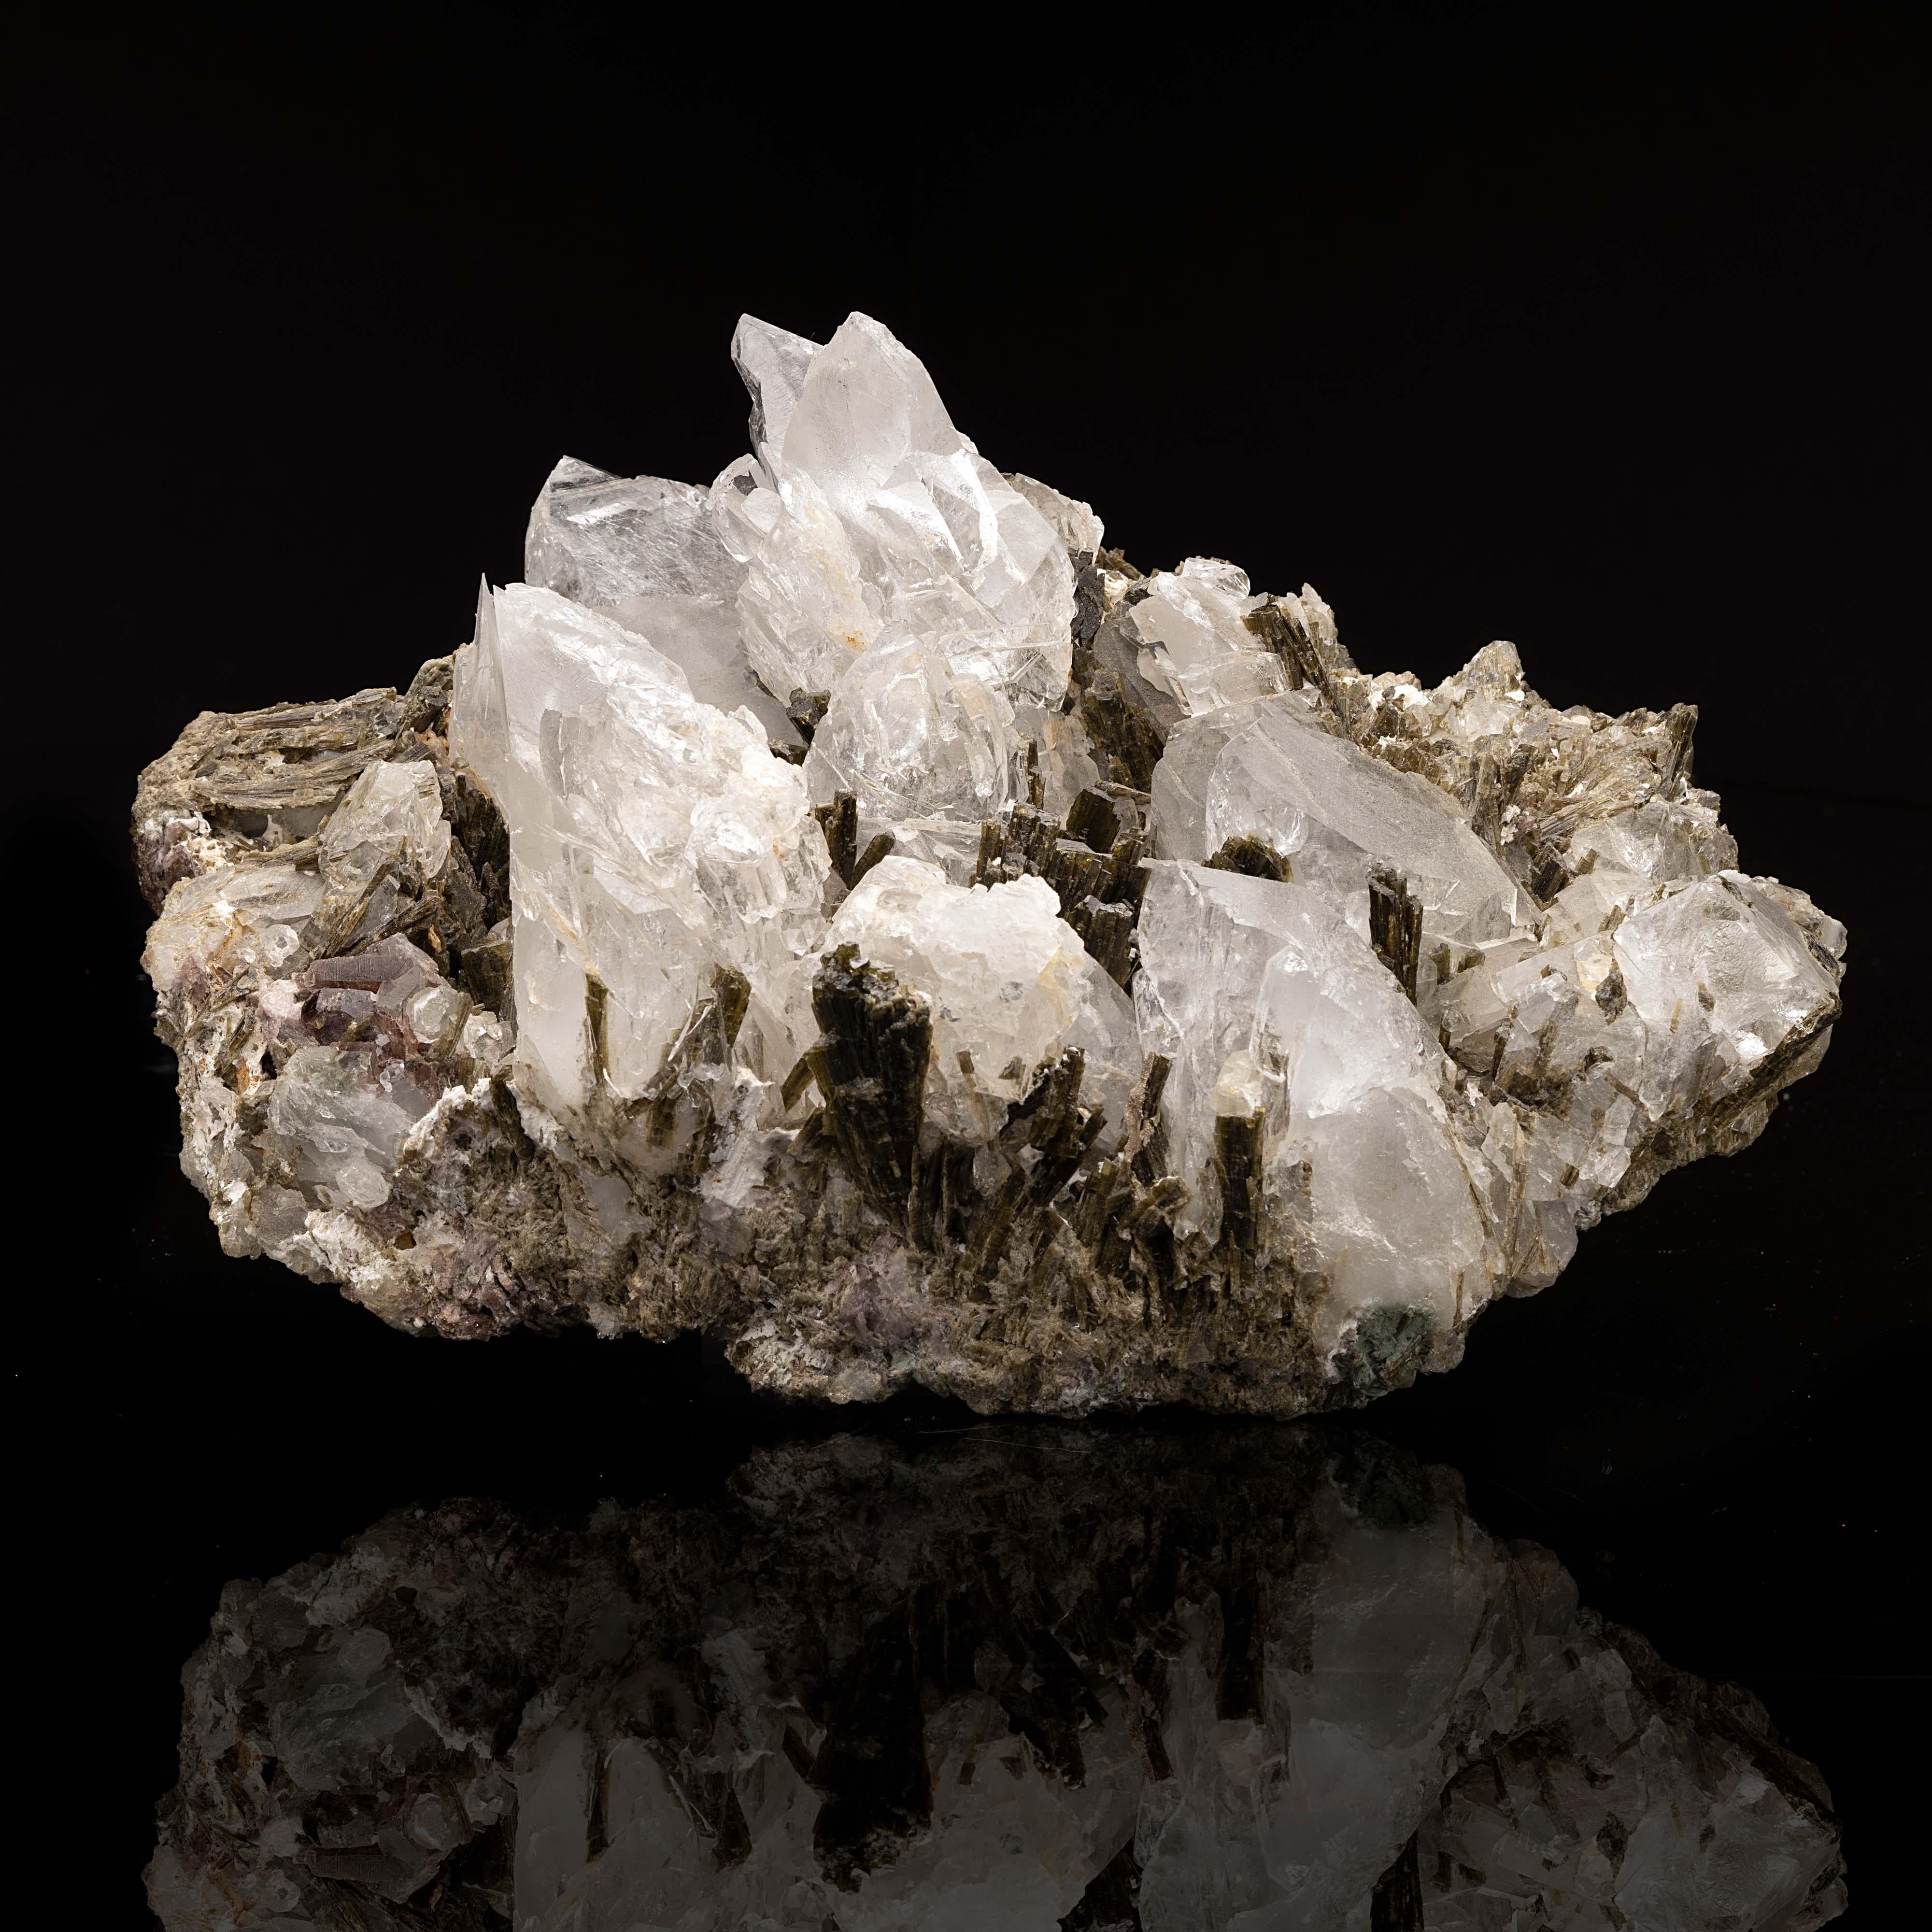 This singular formation from Pakistan features translucent calcite accented by blades of deep green epidote and purple ferroaxinite with quartz crystals on the bottom of the specimen. The lustrous calcite features rainbows. This is a substantial and